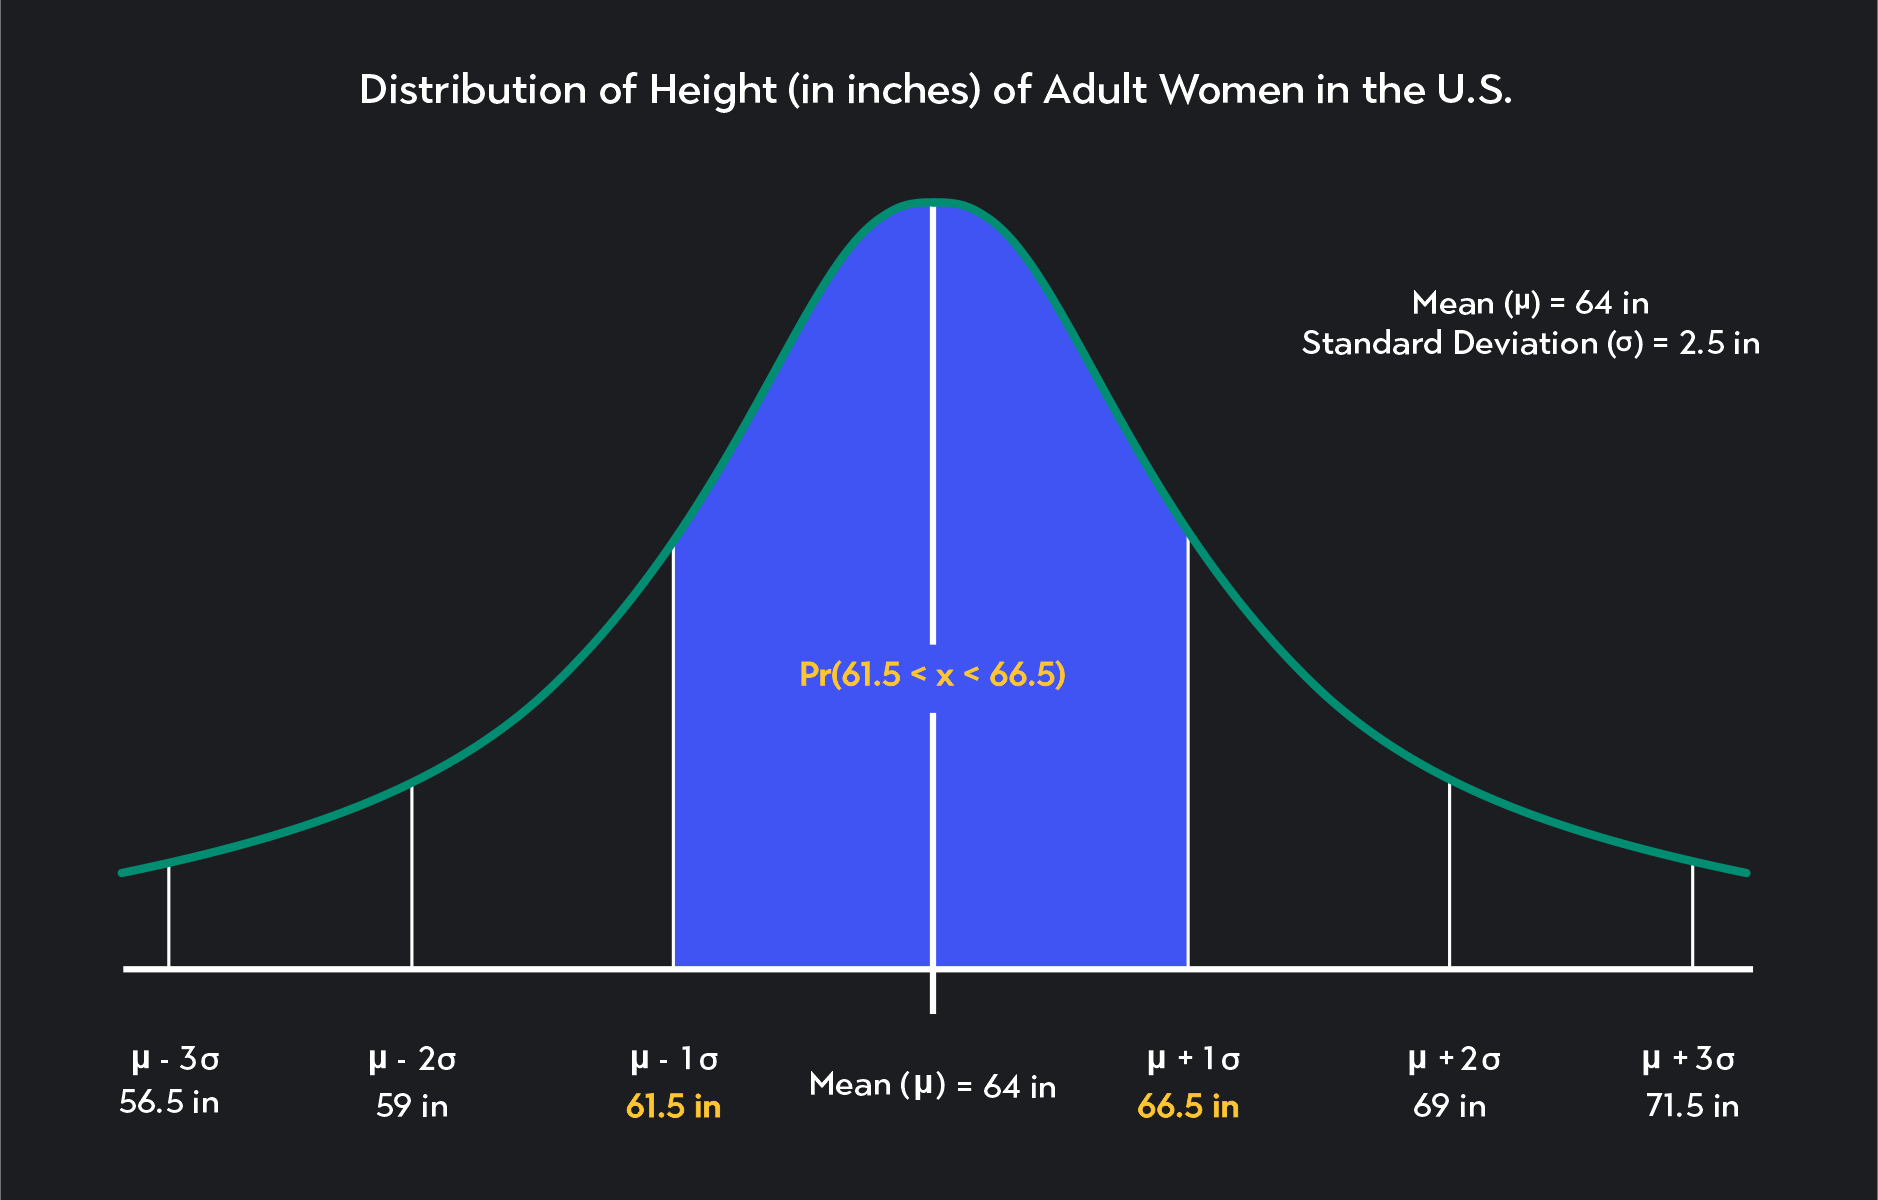 Normal Distribution graph showing the probability that an American woman will be between 61.5 and 66.5 inches tall